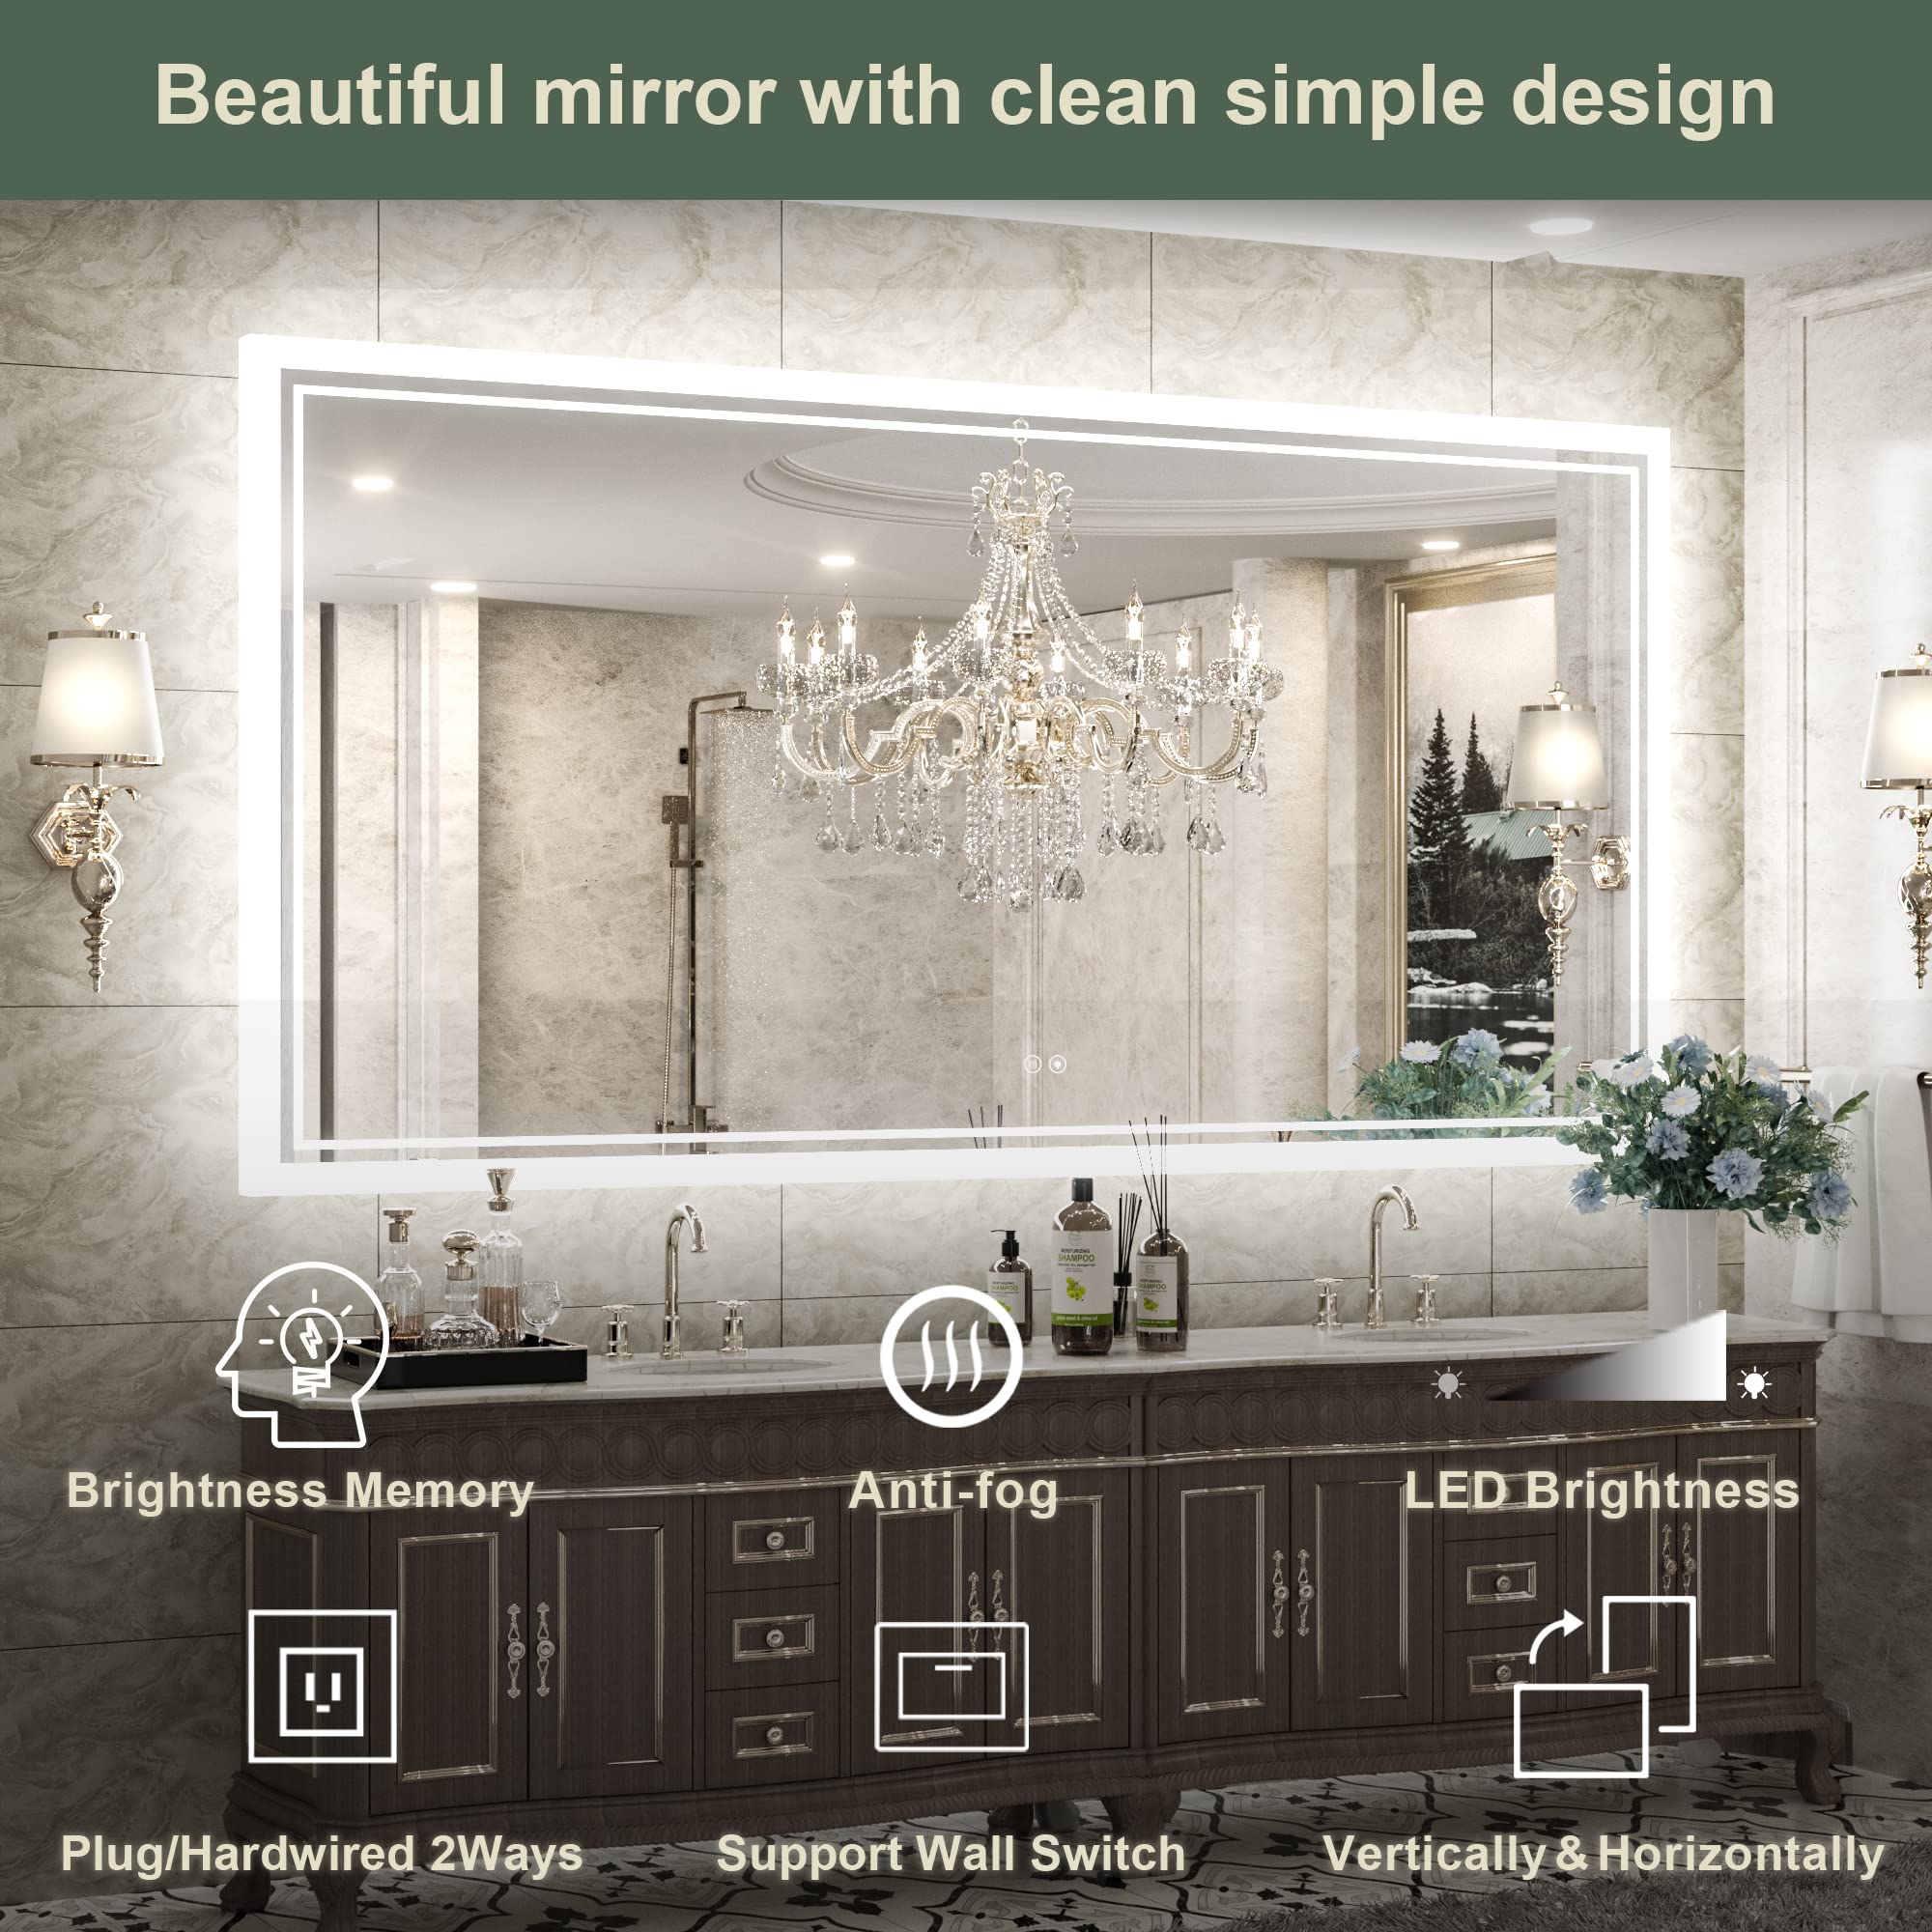 TokeShimi 72x36 Inch Bathroom LED Mirror 3-Color Fashion Style Vanity Make-up Mirror with Light Anti-Fog & Dimmer Touch Switch Adjustable Lights White/Warm/Natural Wall Mounted